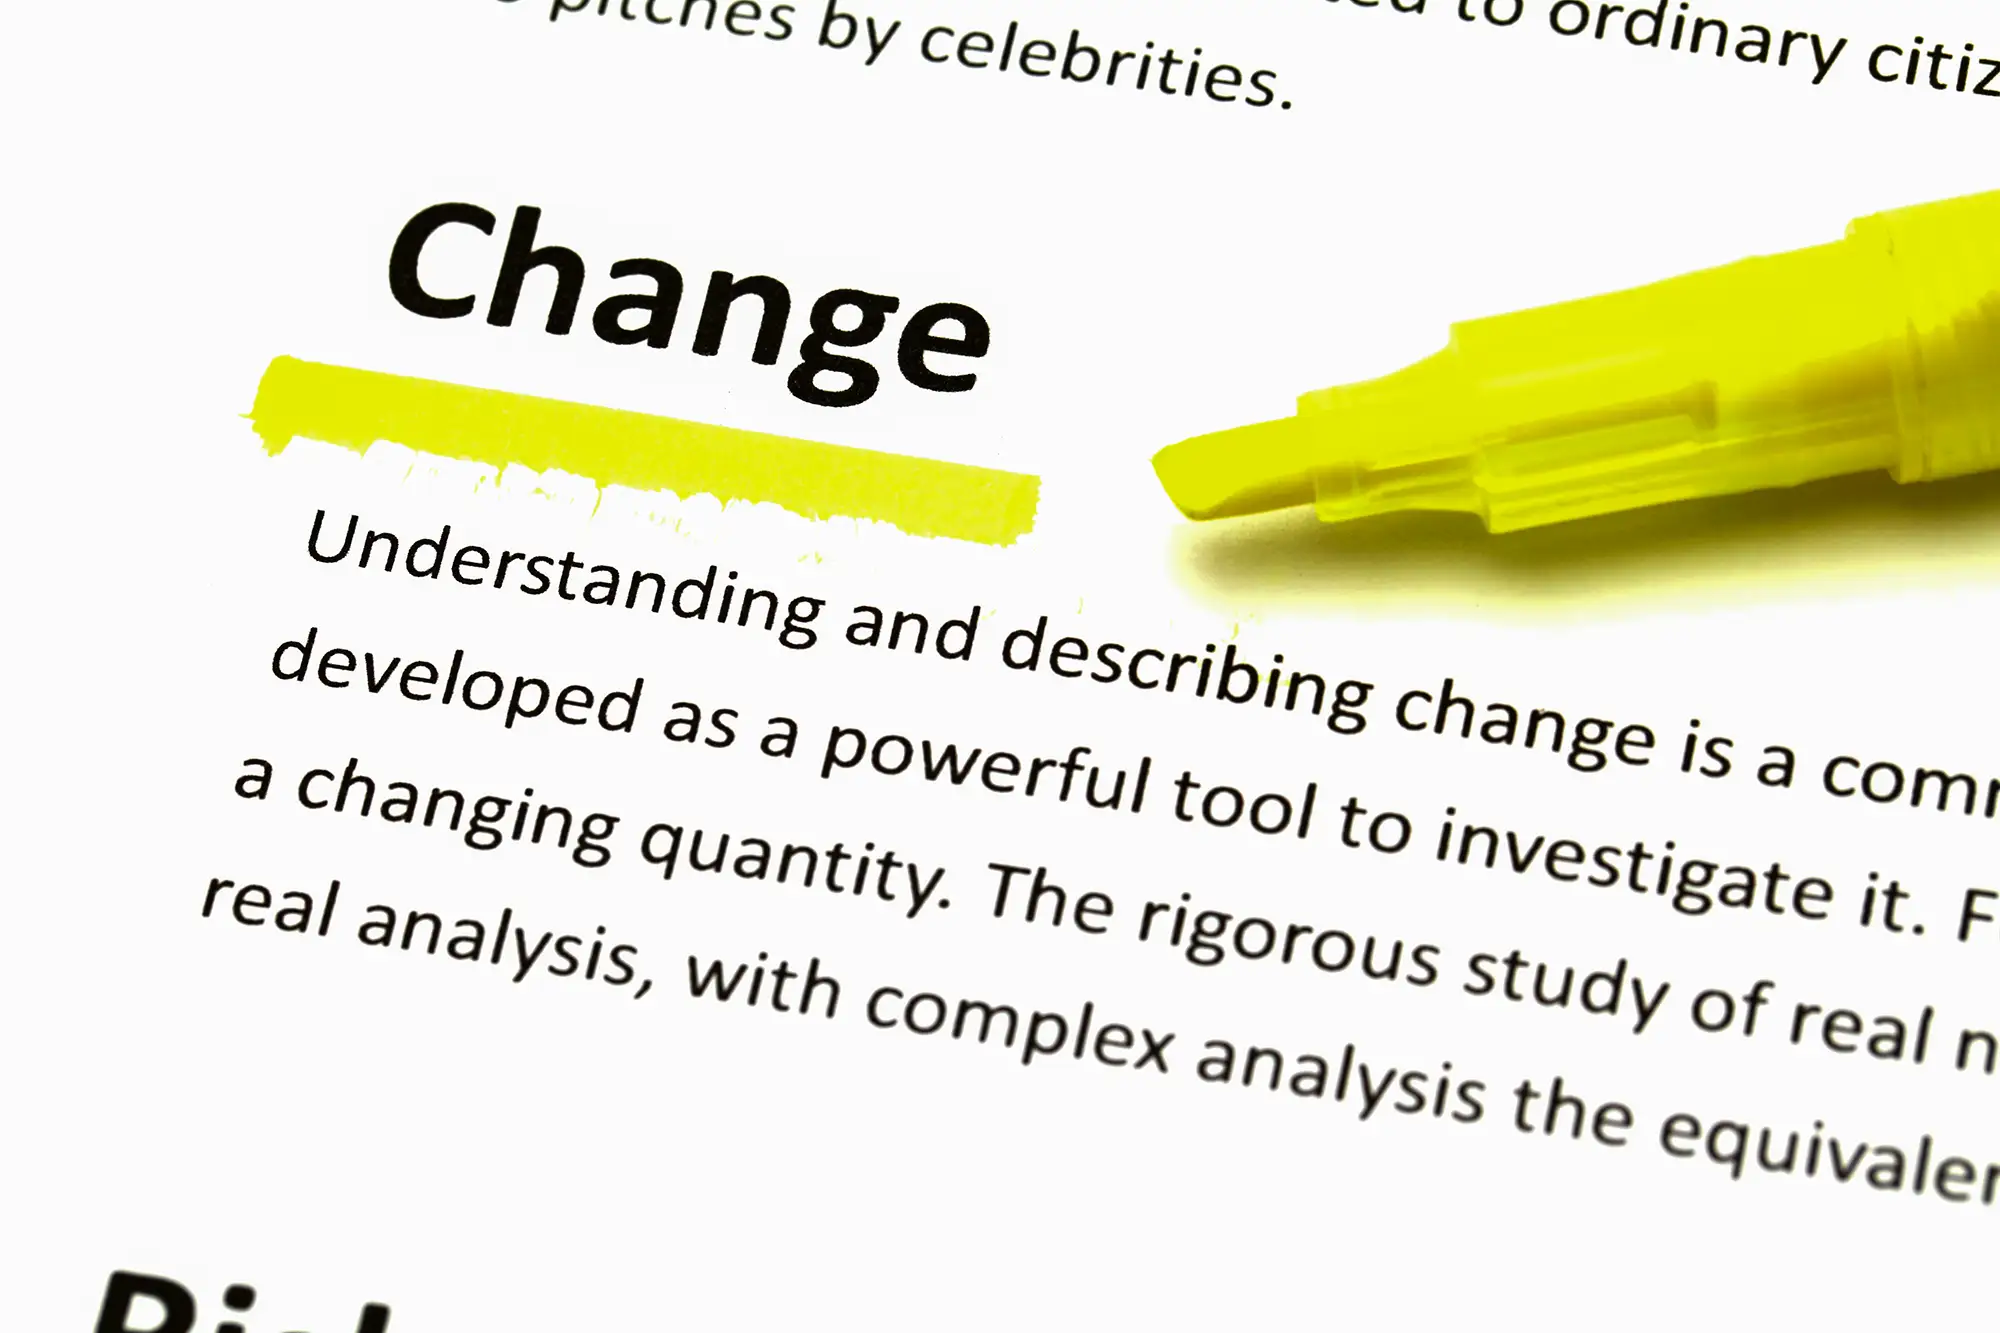 Featured image for “Managing change and overcoming challenges”